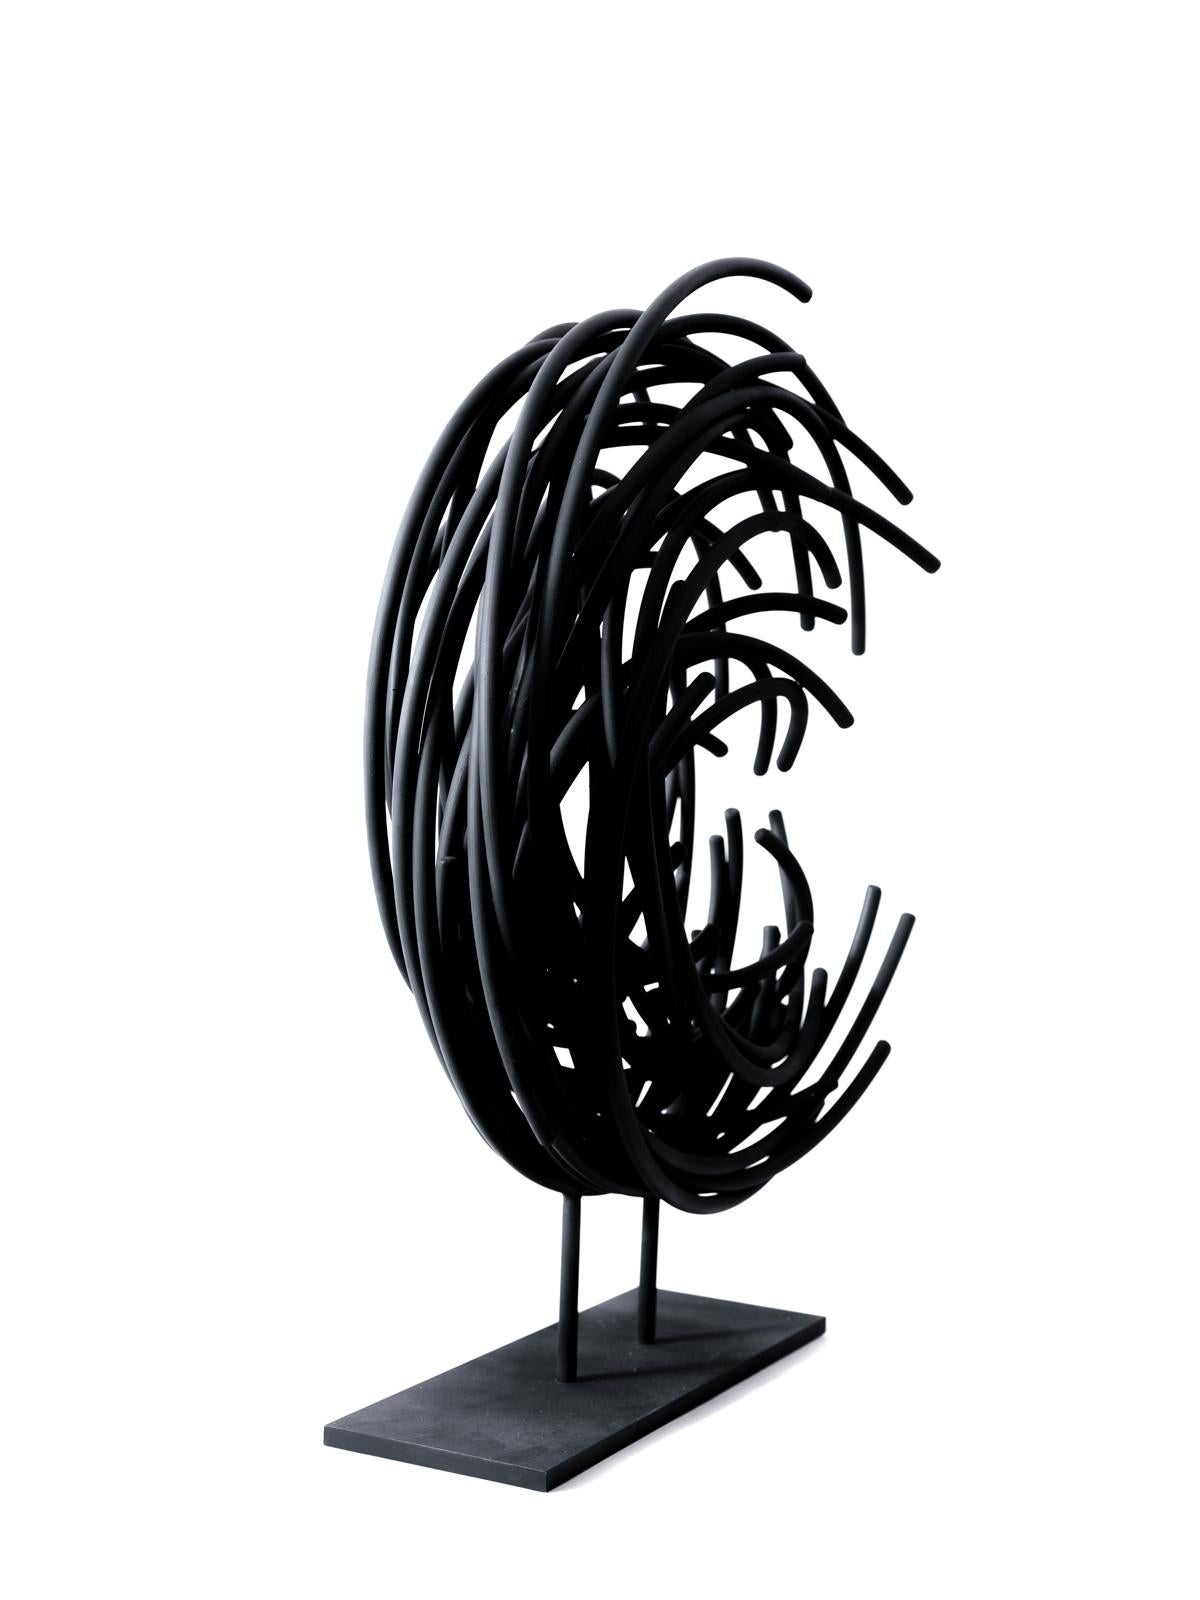 Maelstrom Series No 4 - layered, intersecting, forged aluminum sculpture For Sale 2